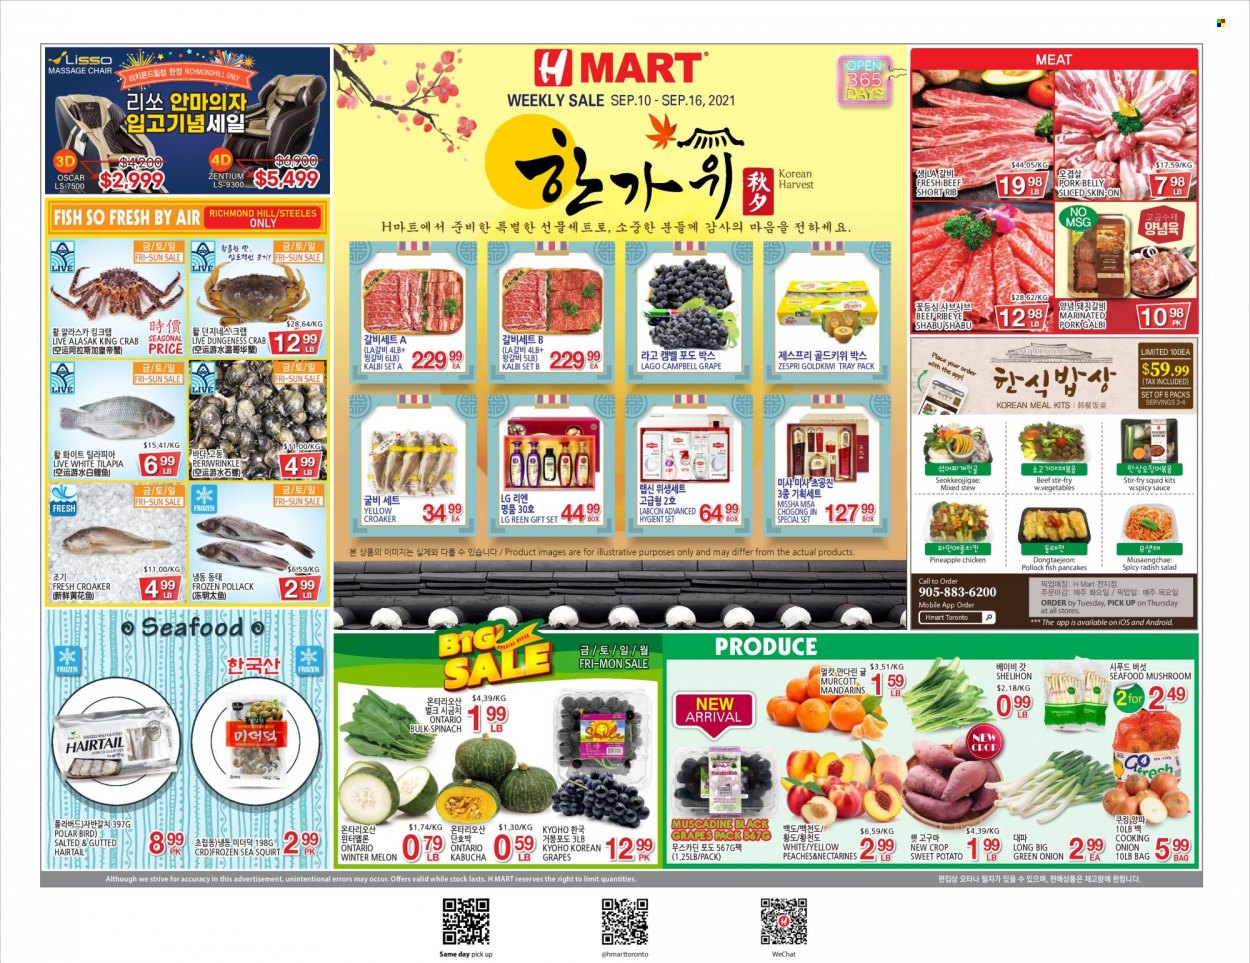 thumbnail - H Mart Flyer - September 10, 2021 - September 16, 2021 - Sales products - mushrooms, radishes, spinach, sweet potato, onion, salad, green onion, mandarines, nectarines, pineapple, melons, peaches, squid, tilapia, king crab, pollock, seafood, crab, fish, sauce, pancakes, Shabu, pork belly, pork meat, gift set, massage chair, LG. Page 1.